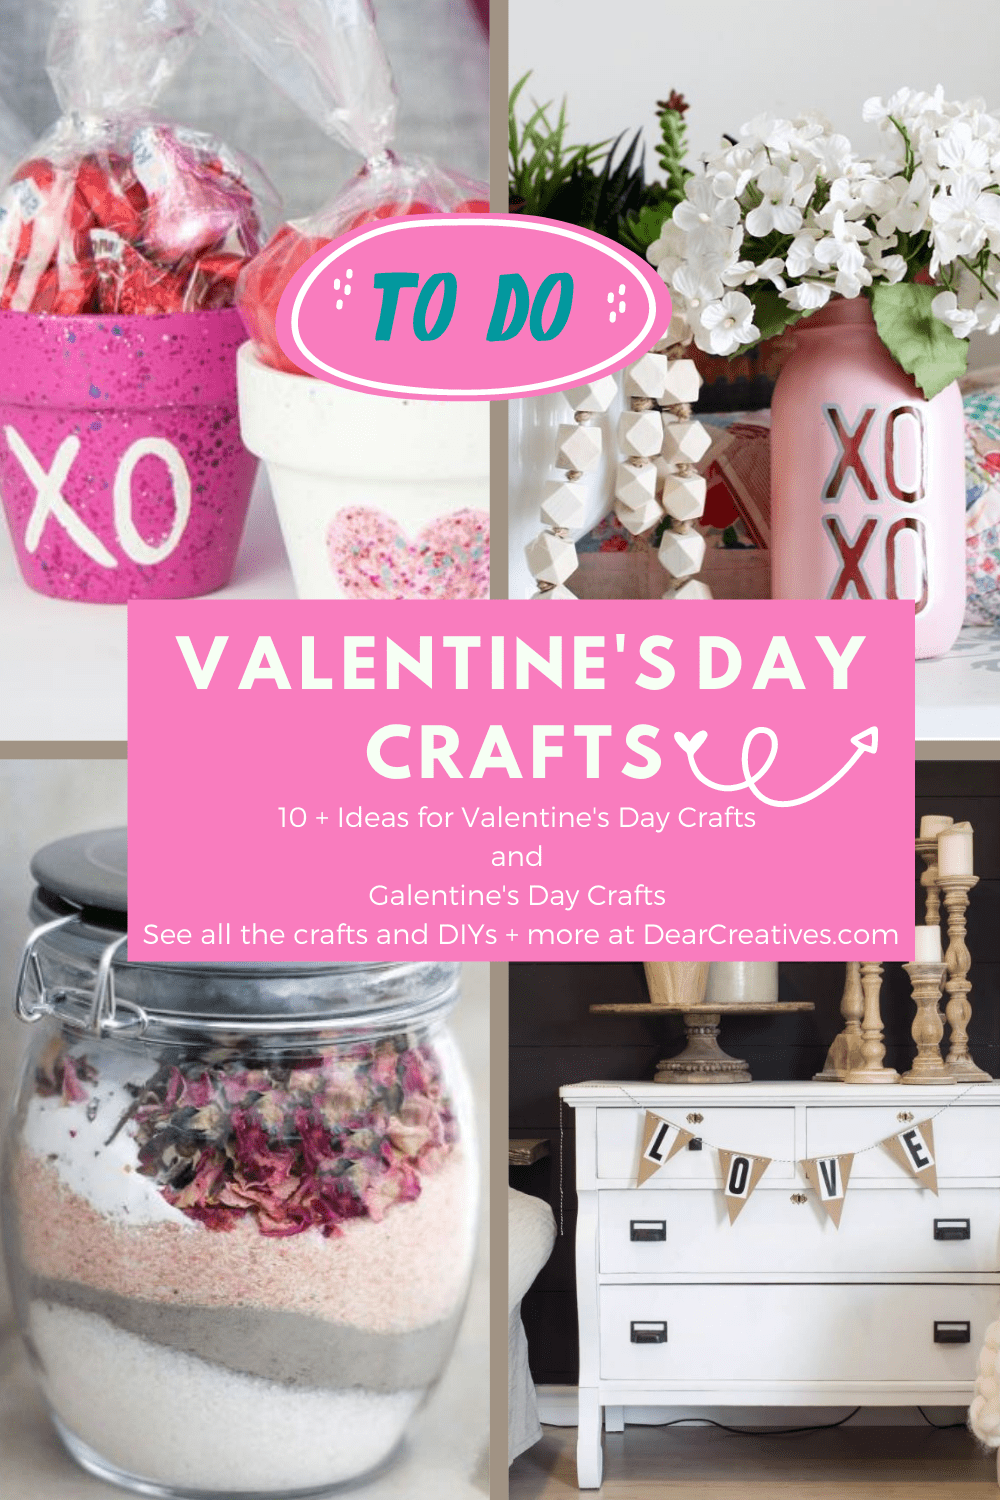 25+ Ideas For Valentine’s Day Crafts – Easy To Make!